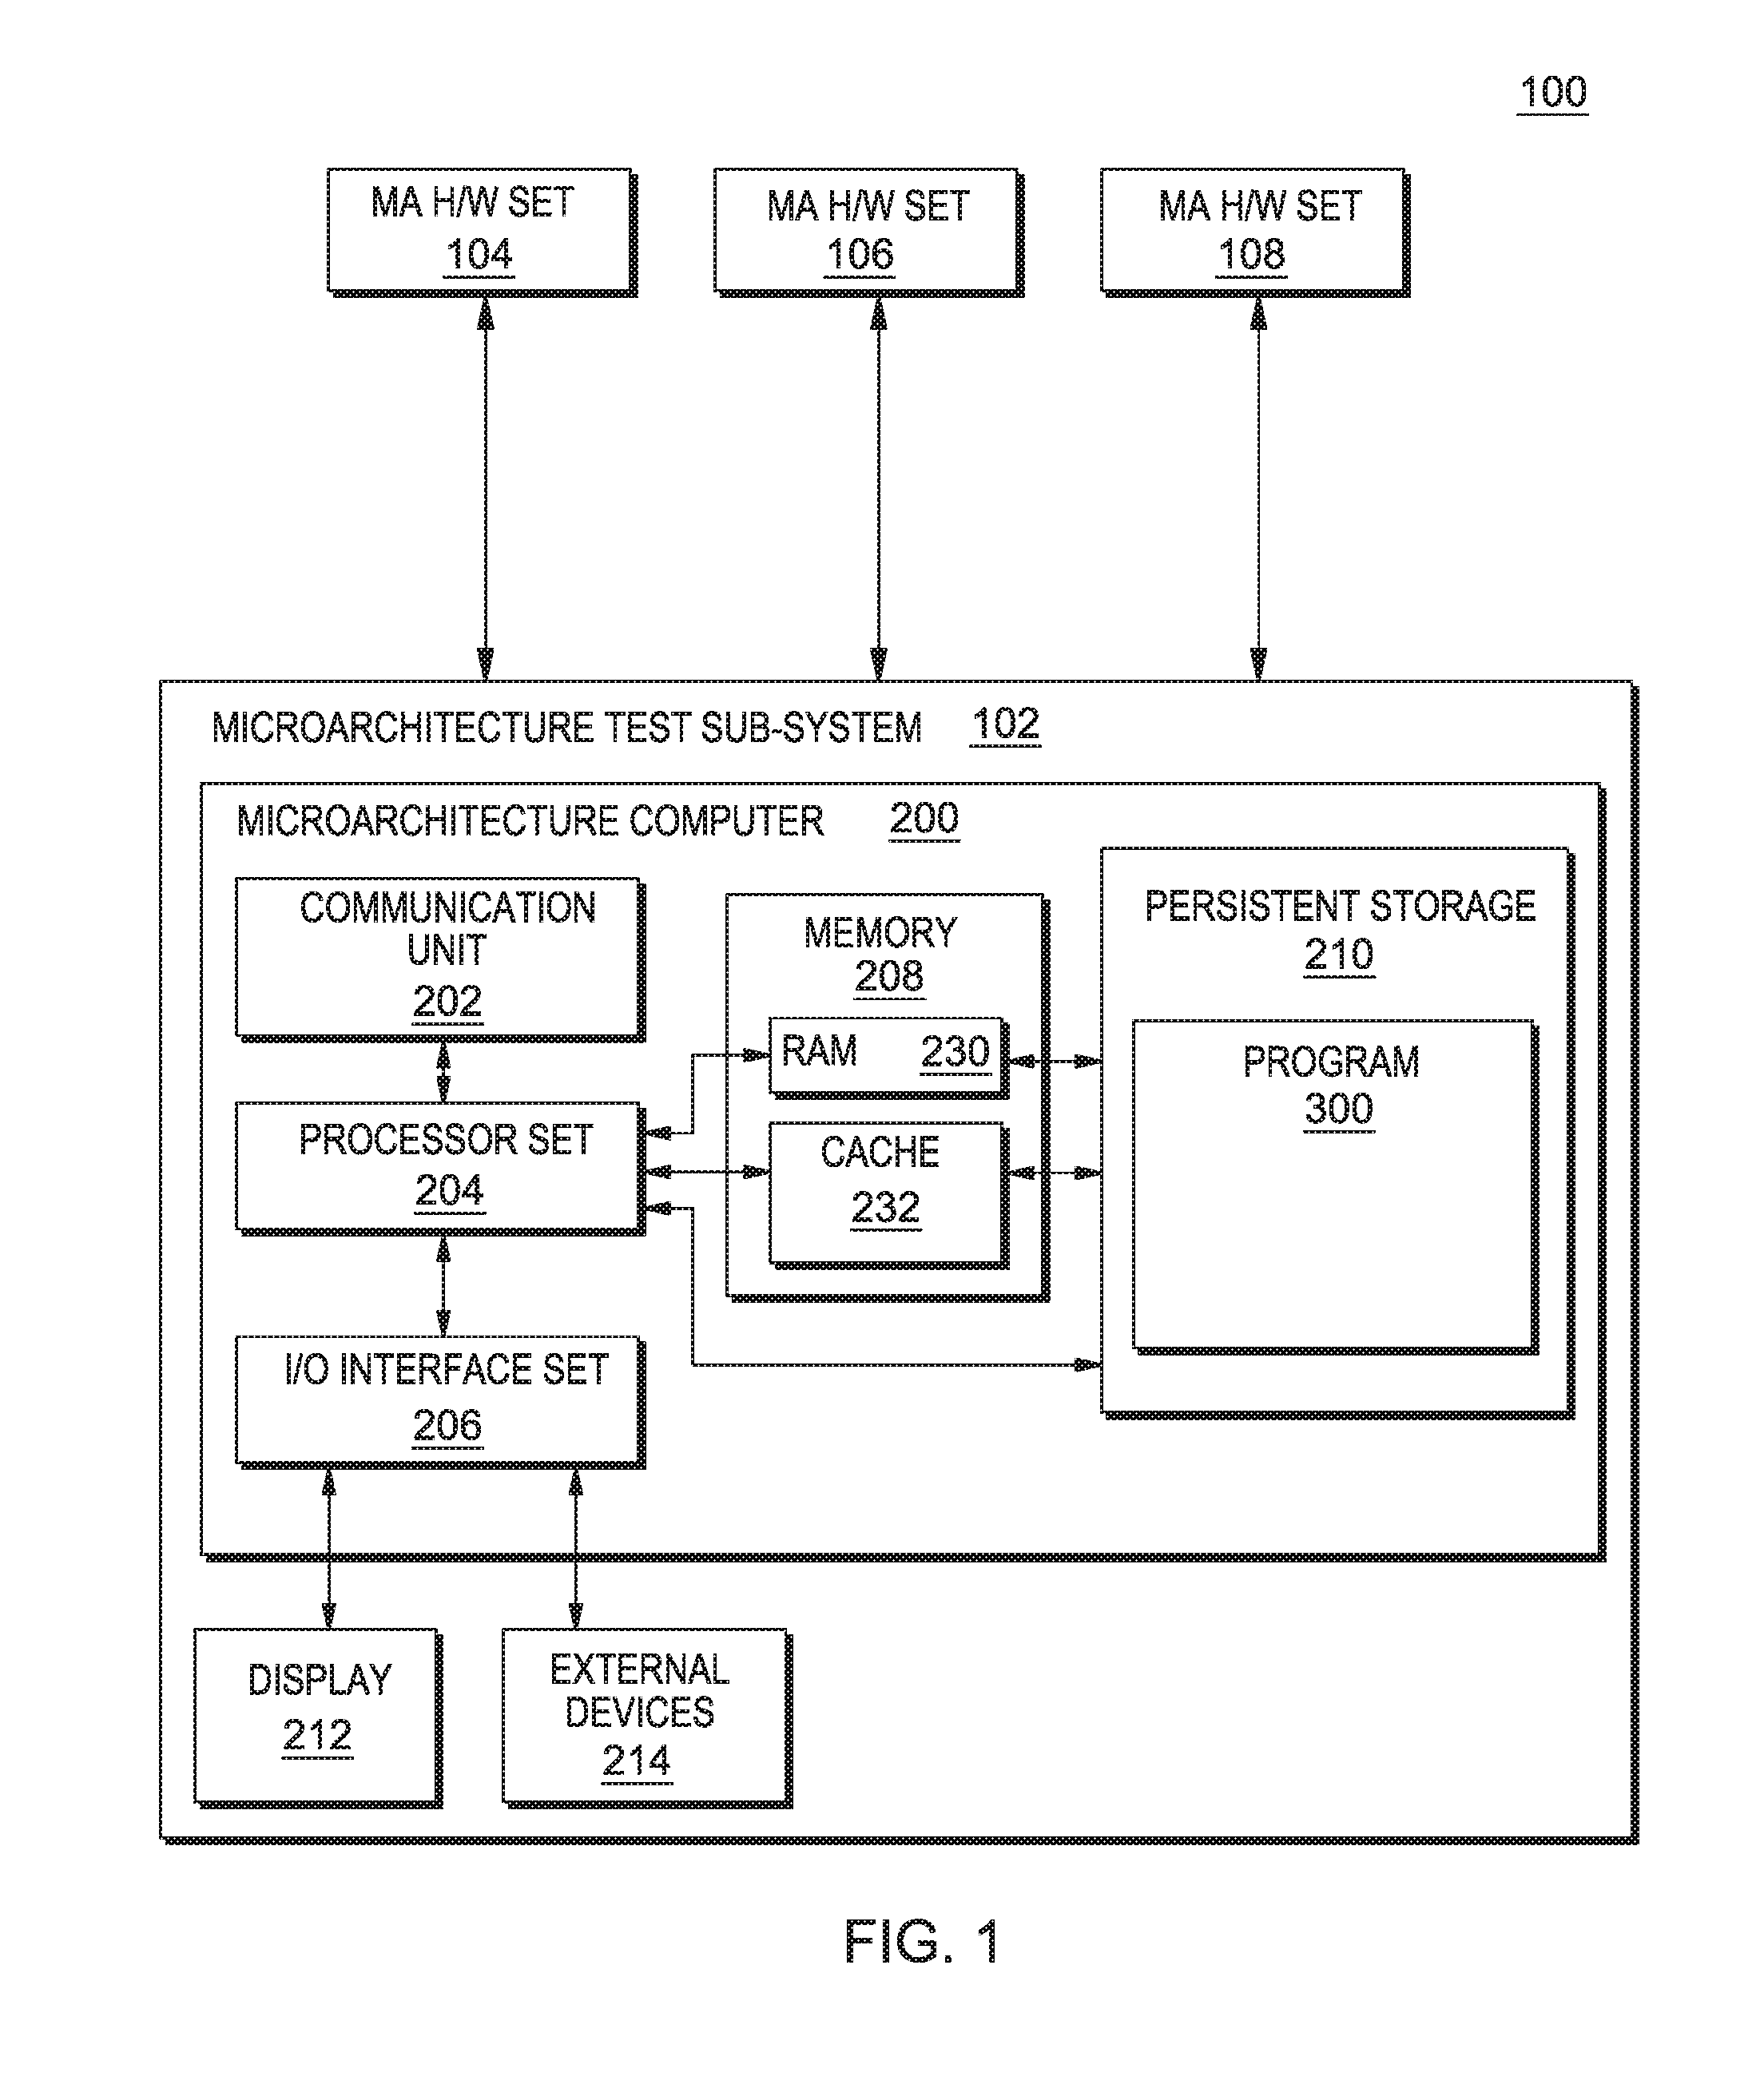 Branch synthetic generation across multiple microarchitecture generations